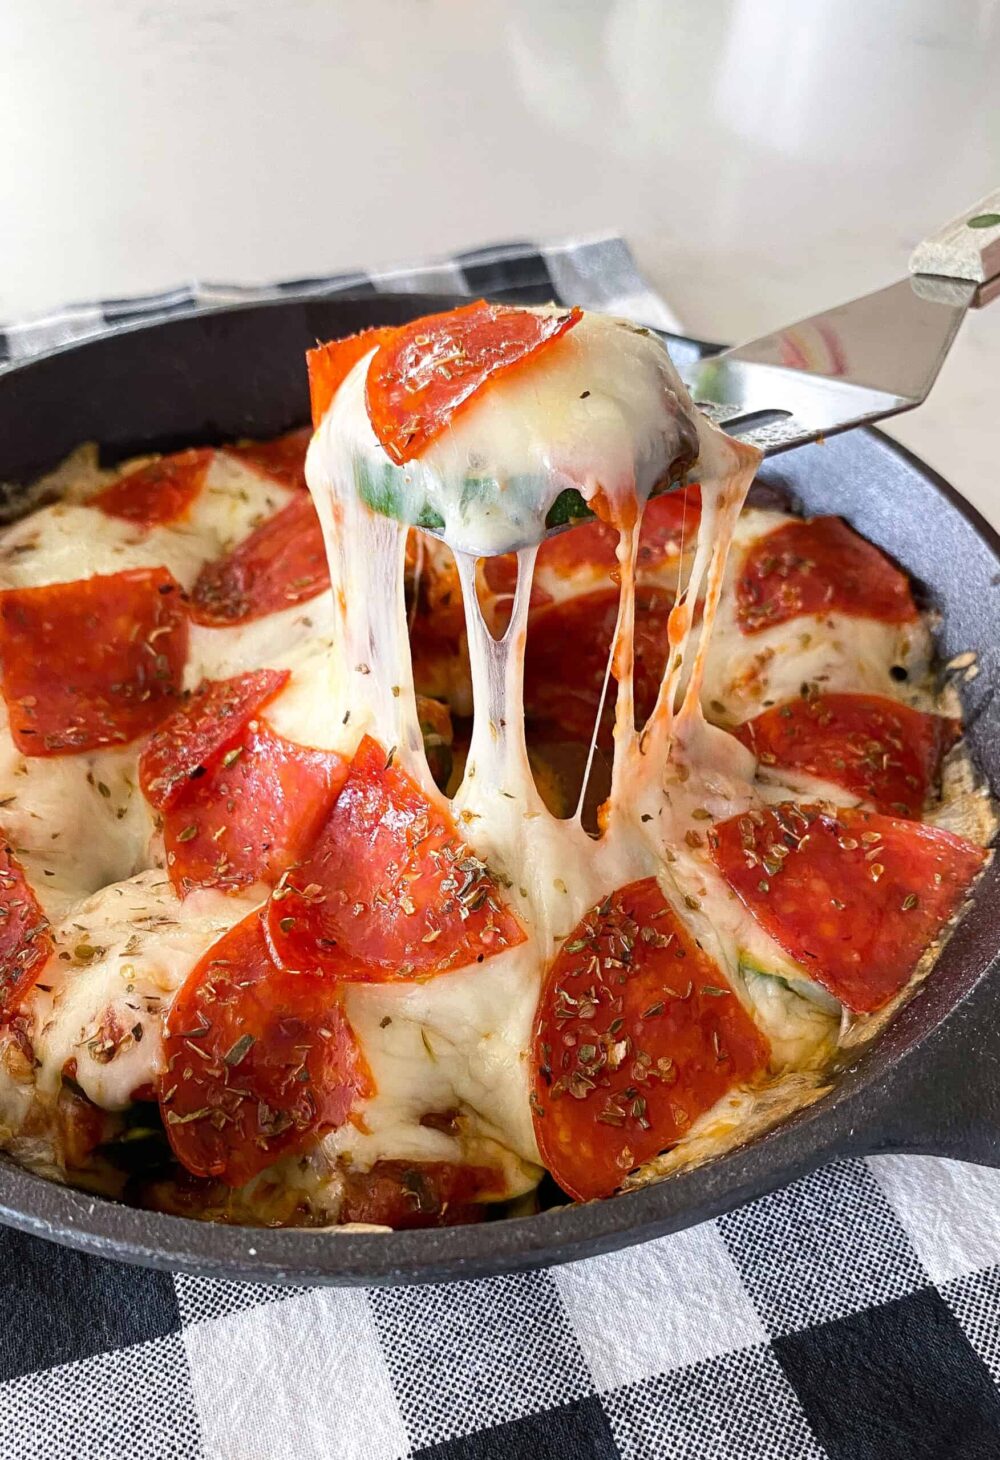 keto pizza served in cast iron skillet